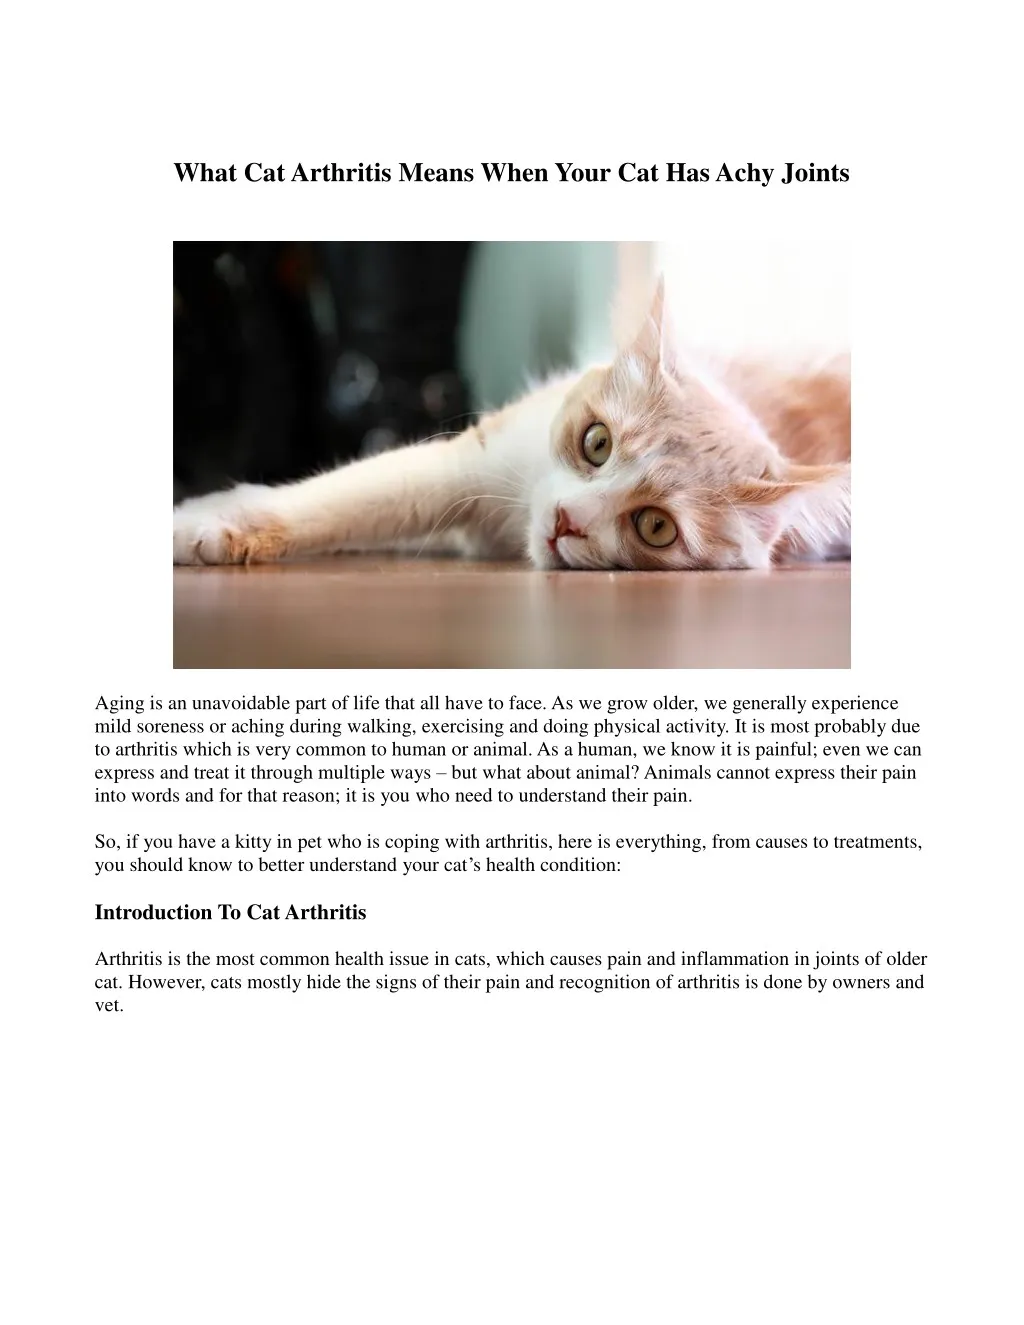 what cat arthritis means when your cat has achy